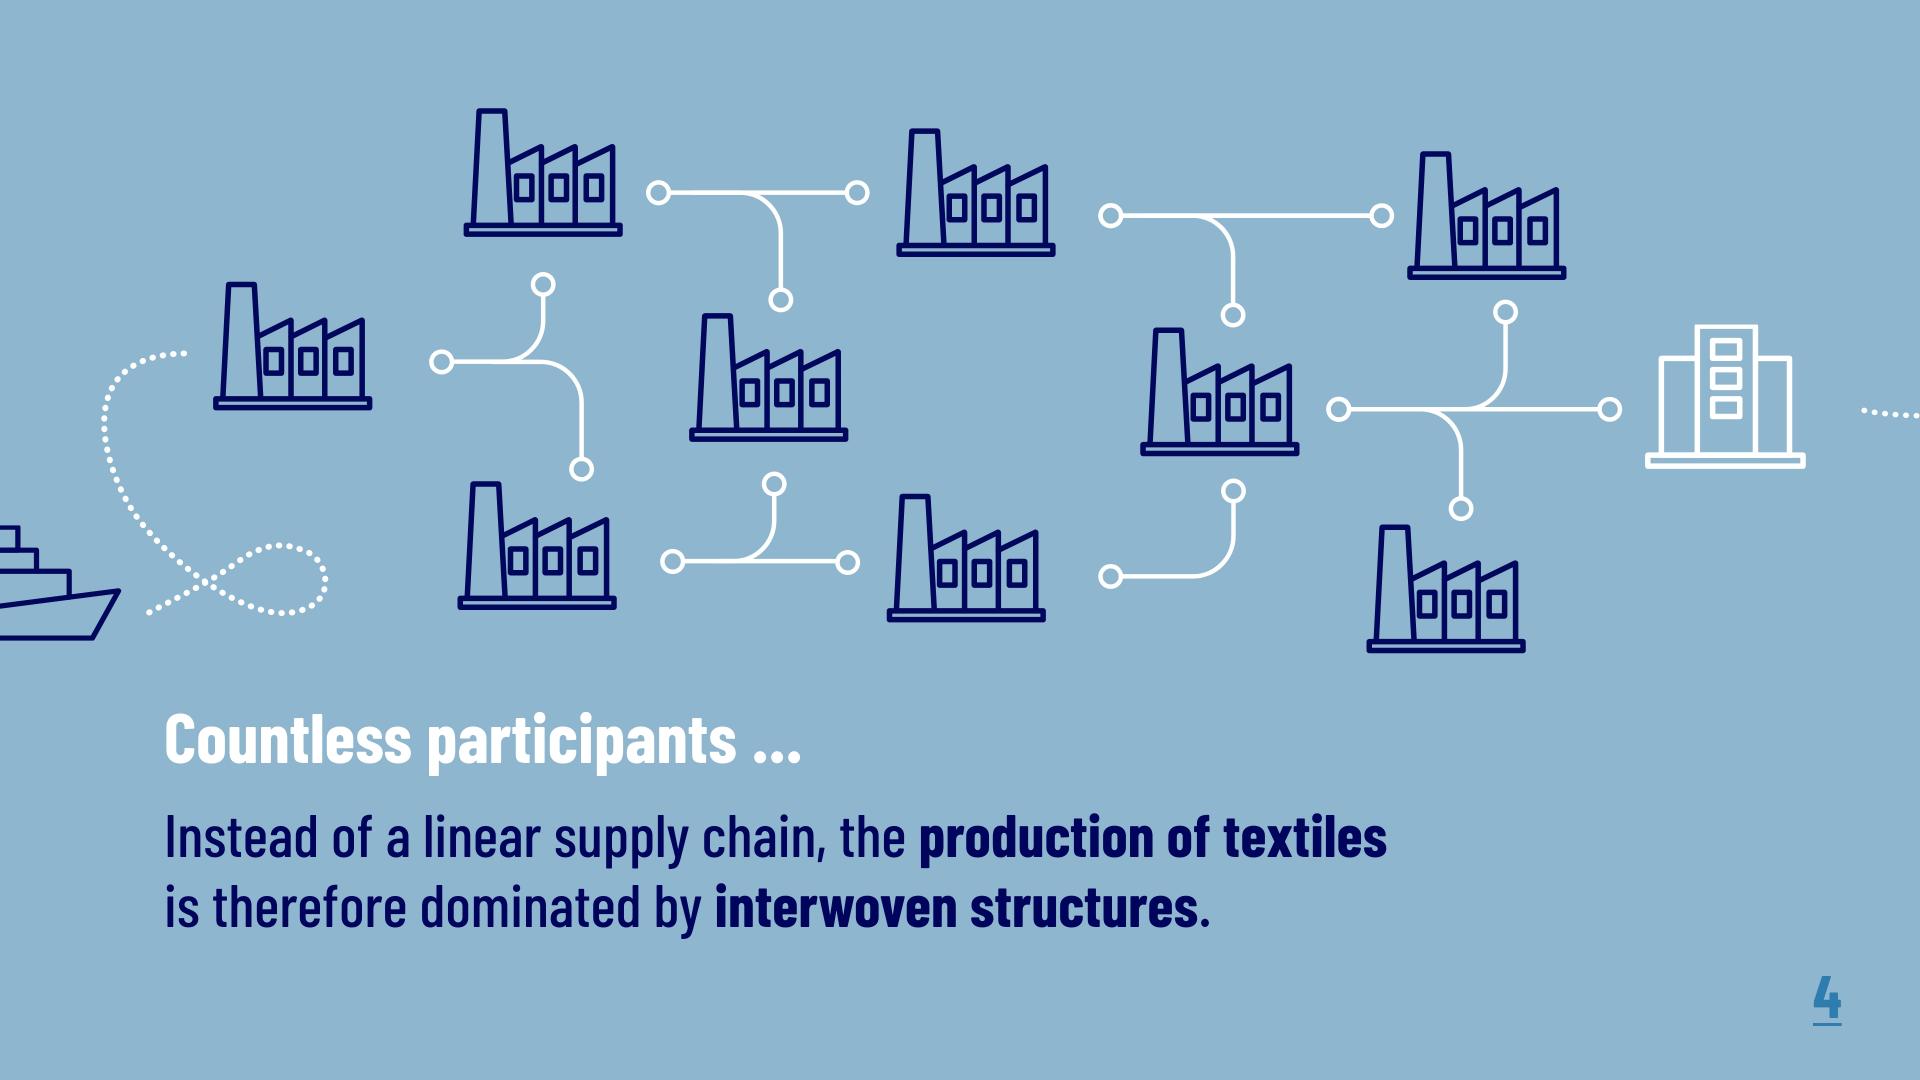 Countless participants...instead of a linear supply chain, the production of textiles is therefore dominated by interwoven structures. 